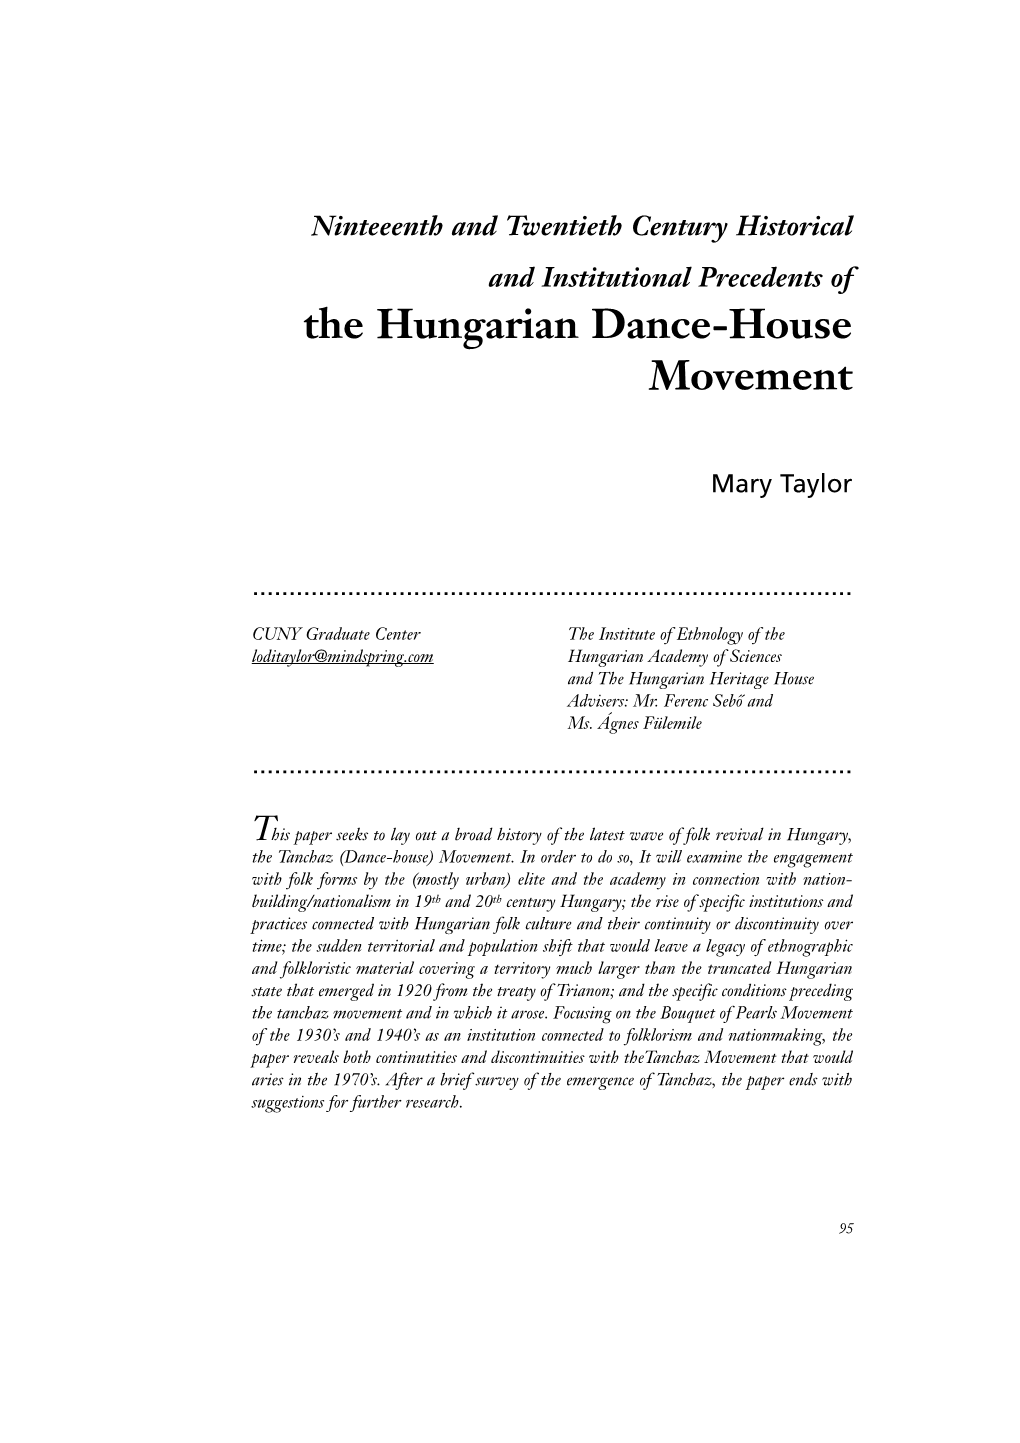 Mary Taylor: the Hungarian Dance-House Movement